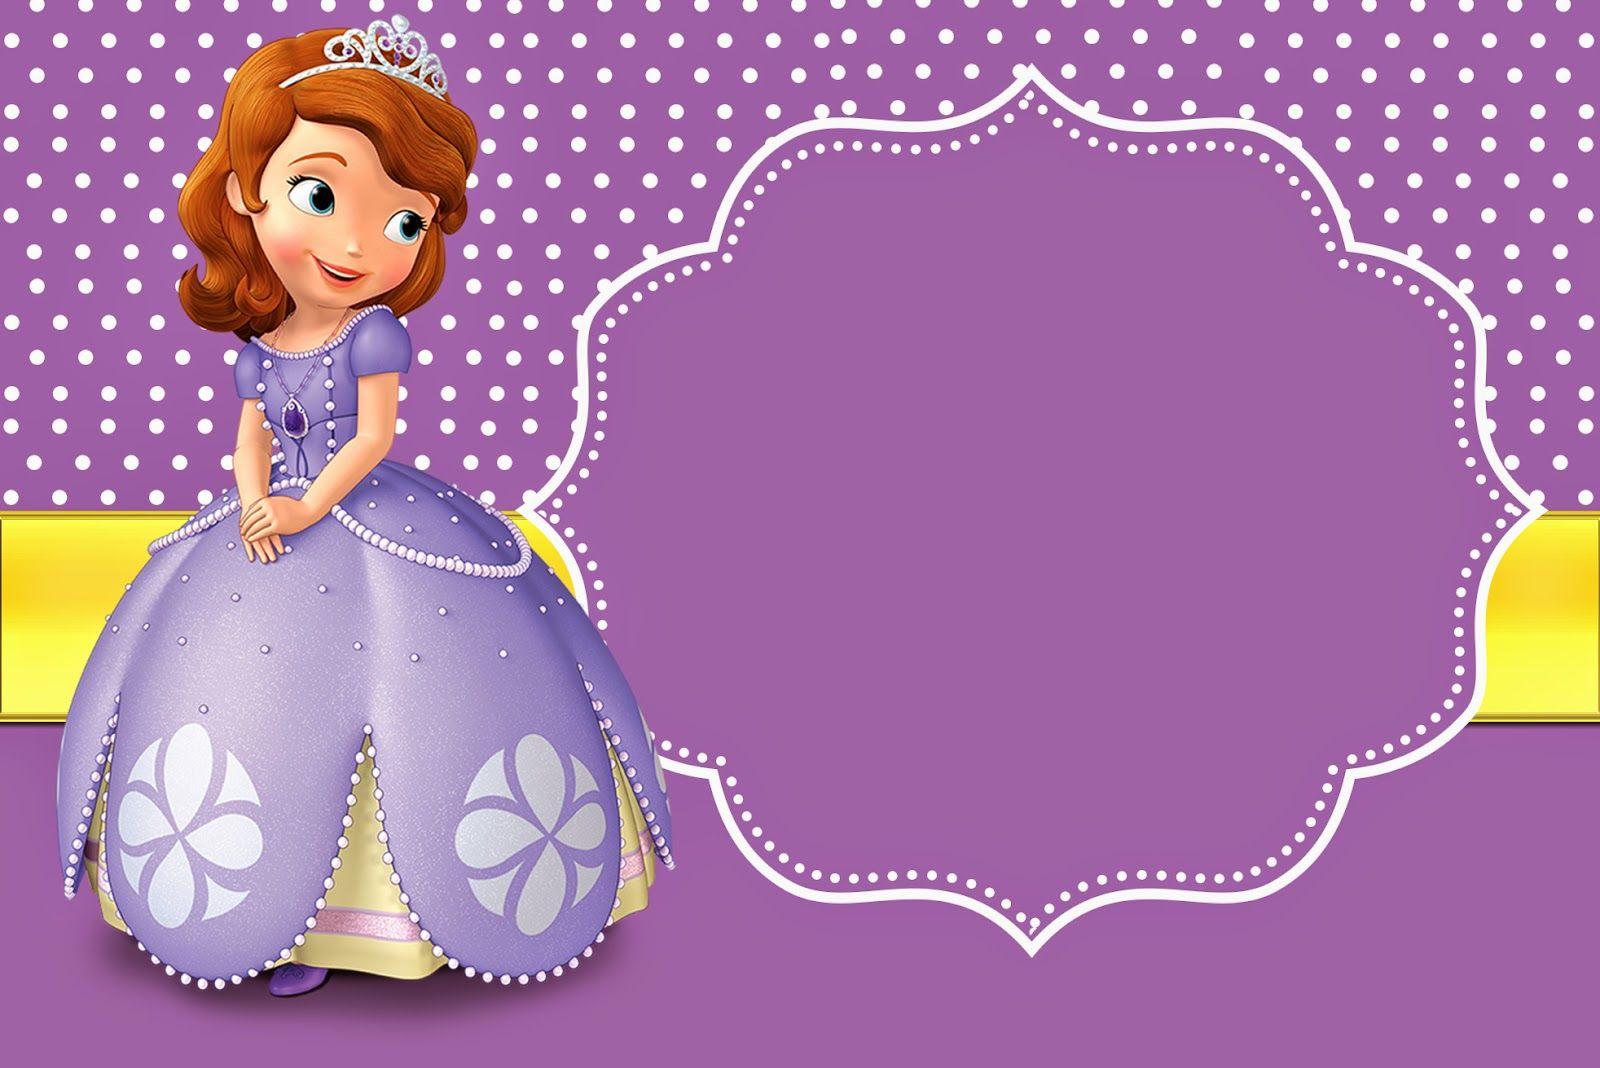 Sofia The First illustration Wall decal Sticker The Walt Disney Company  sofia room disney Princess fictional Character png  PNGWing